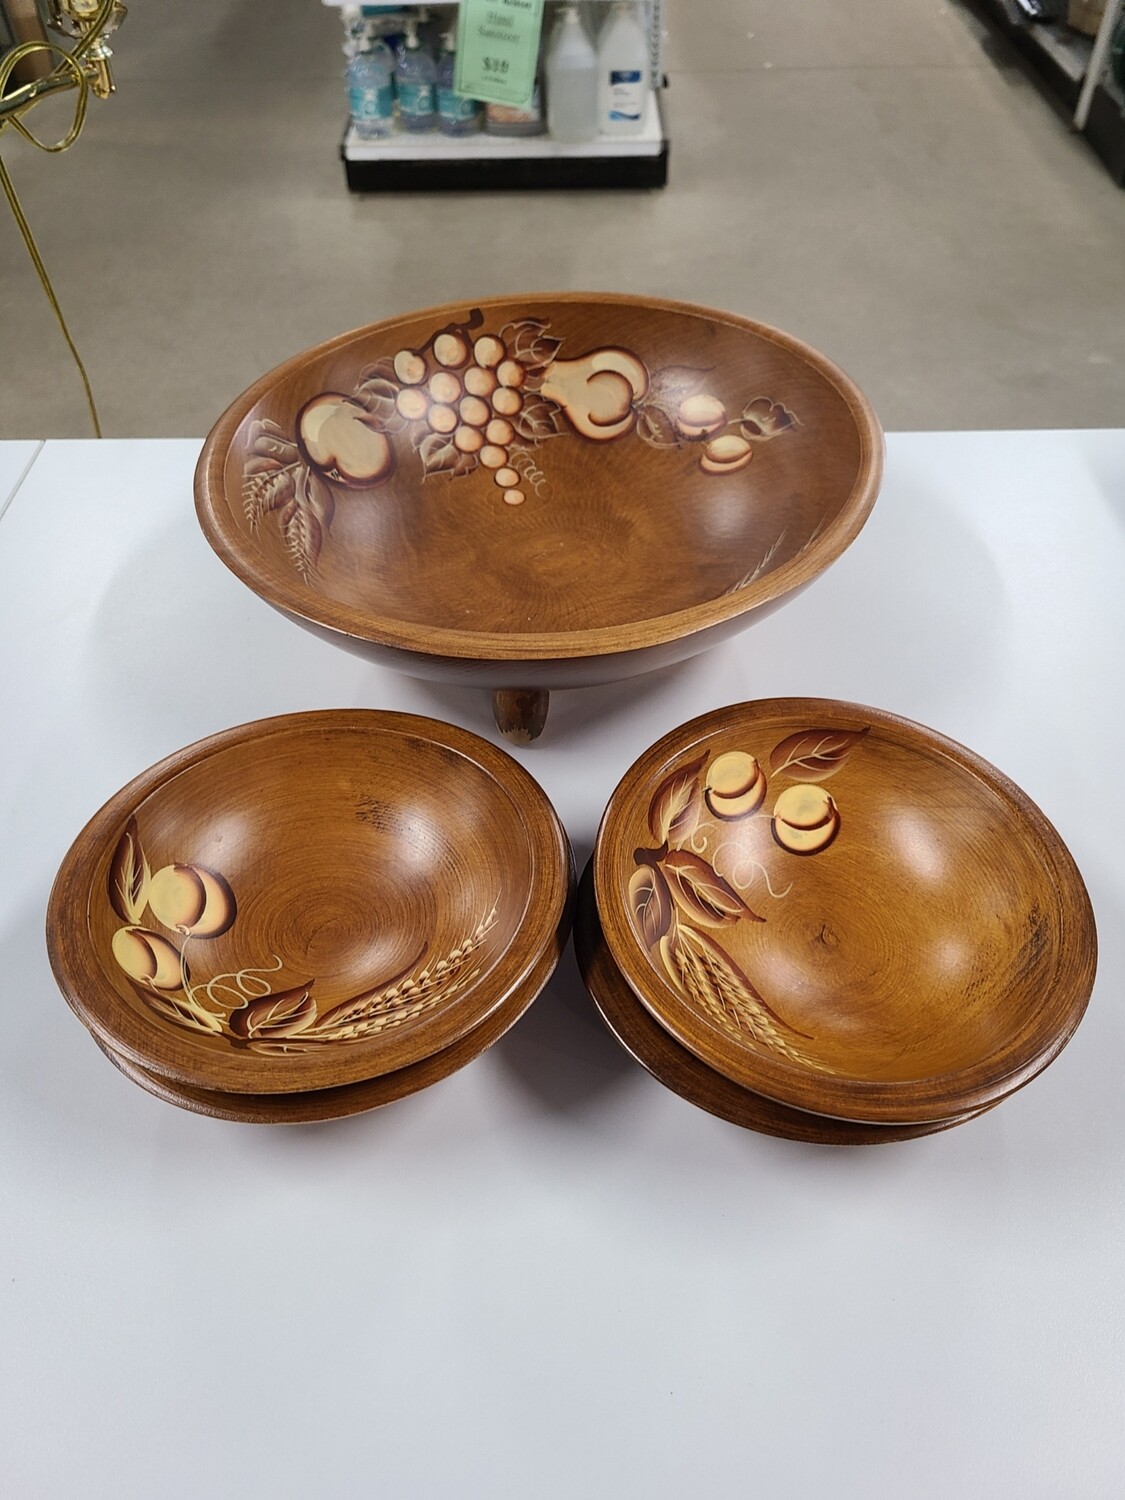 Woodcraftery Hand-Painted Bowls